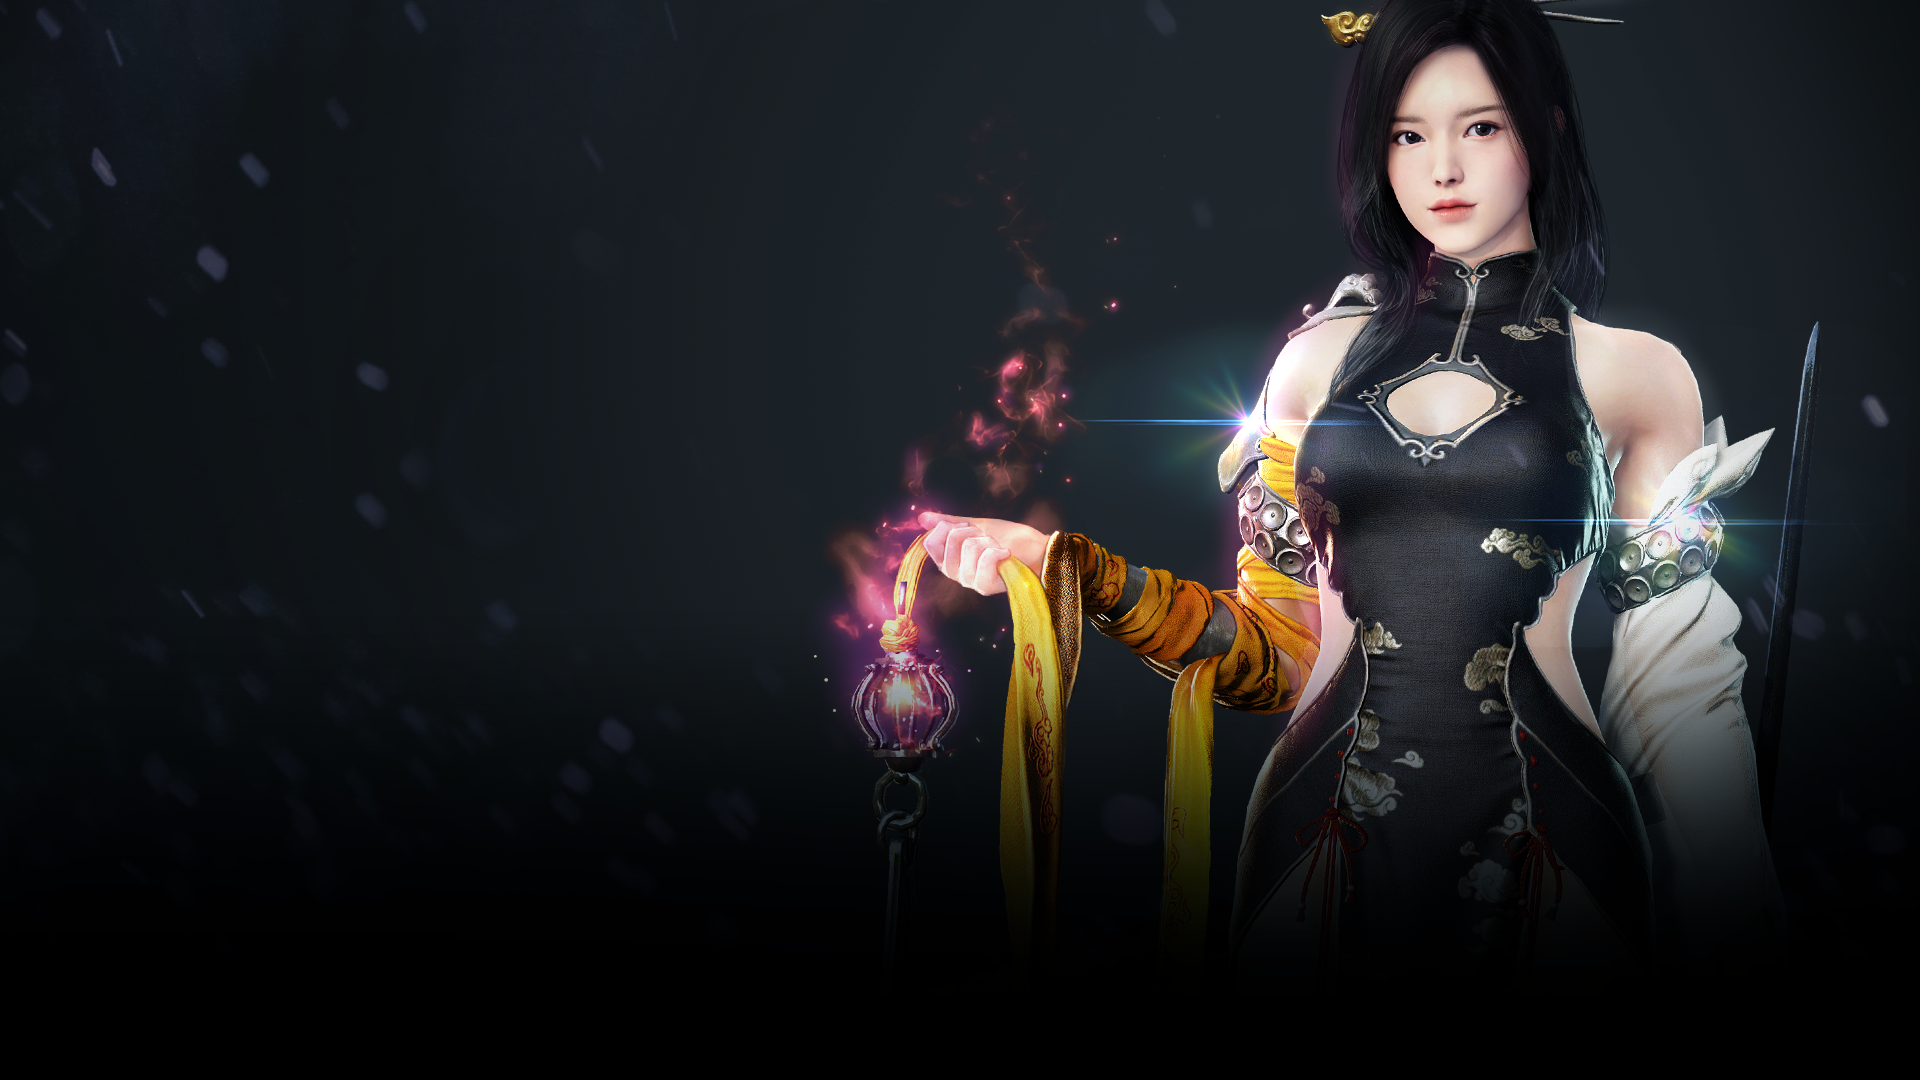 There are far more images available for Black Desert, but these are the one...